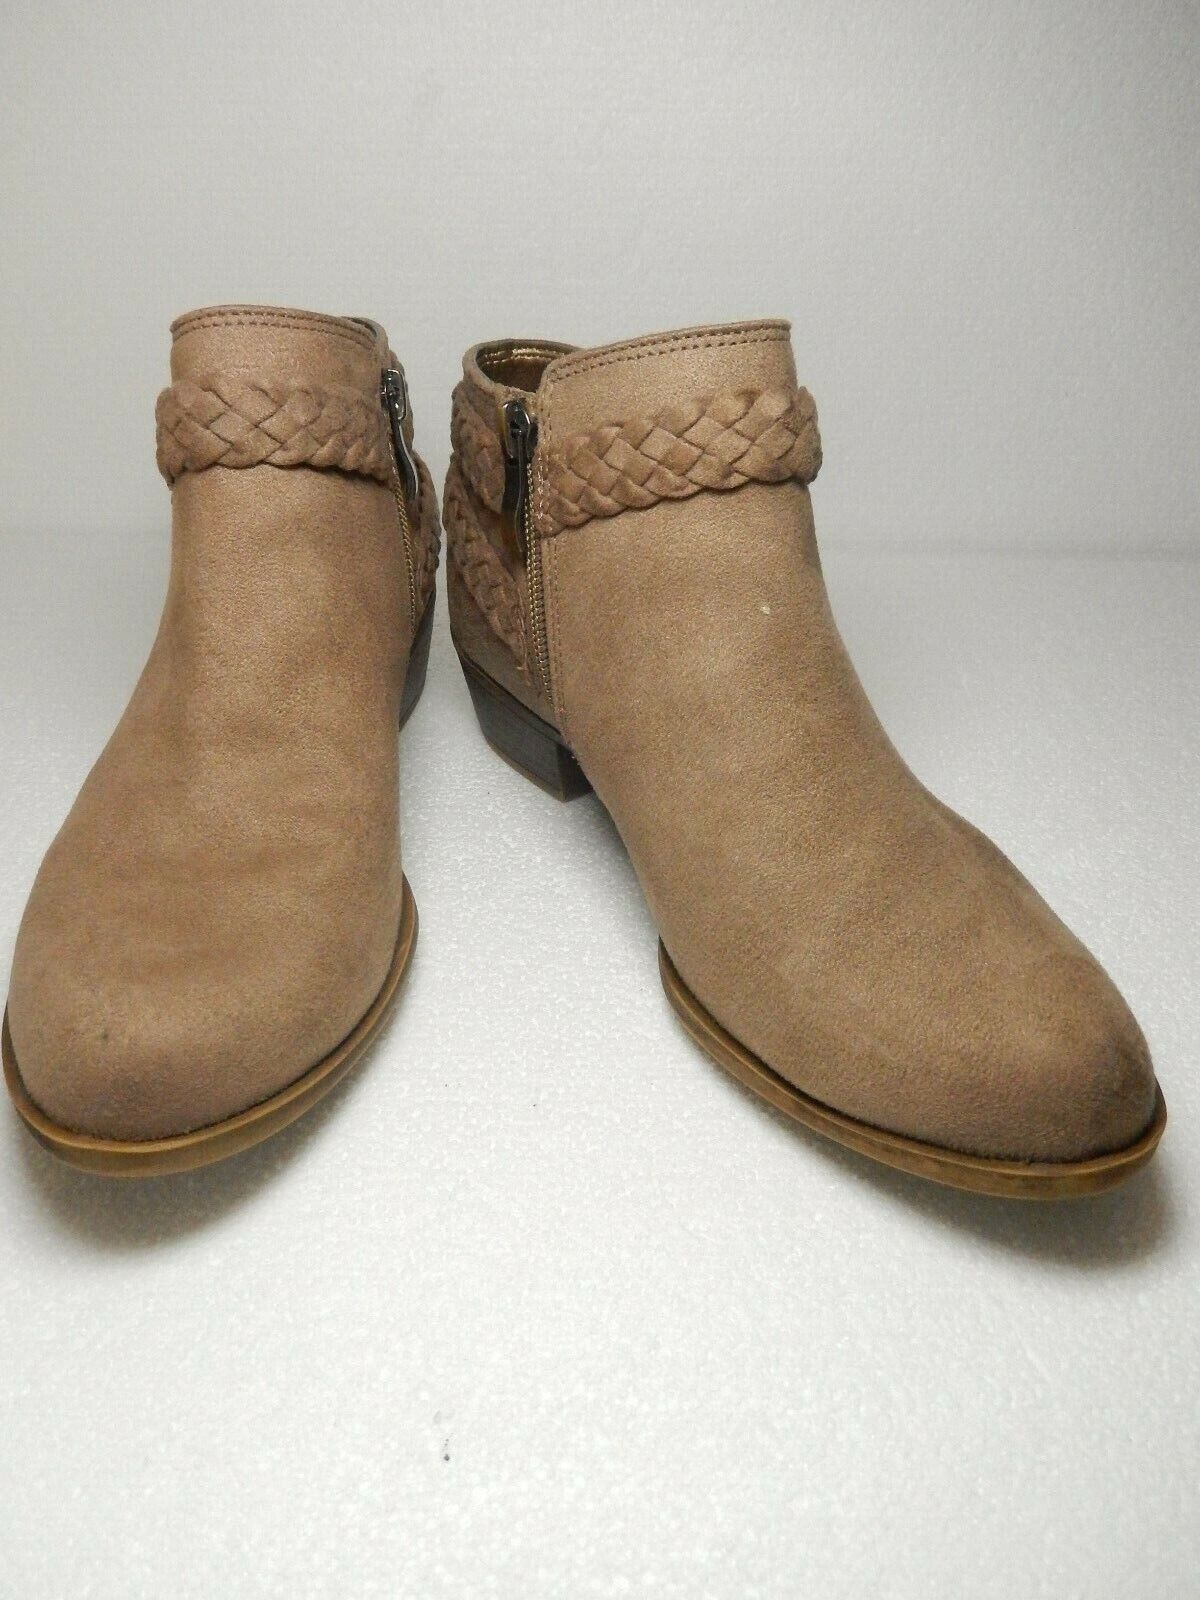 Women's LifeStride Velocity Adriana Ankle Boot Booties Adult Size 6.5 M